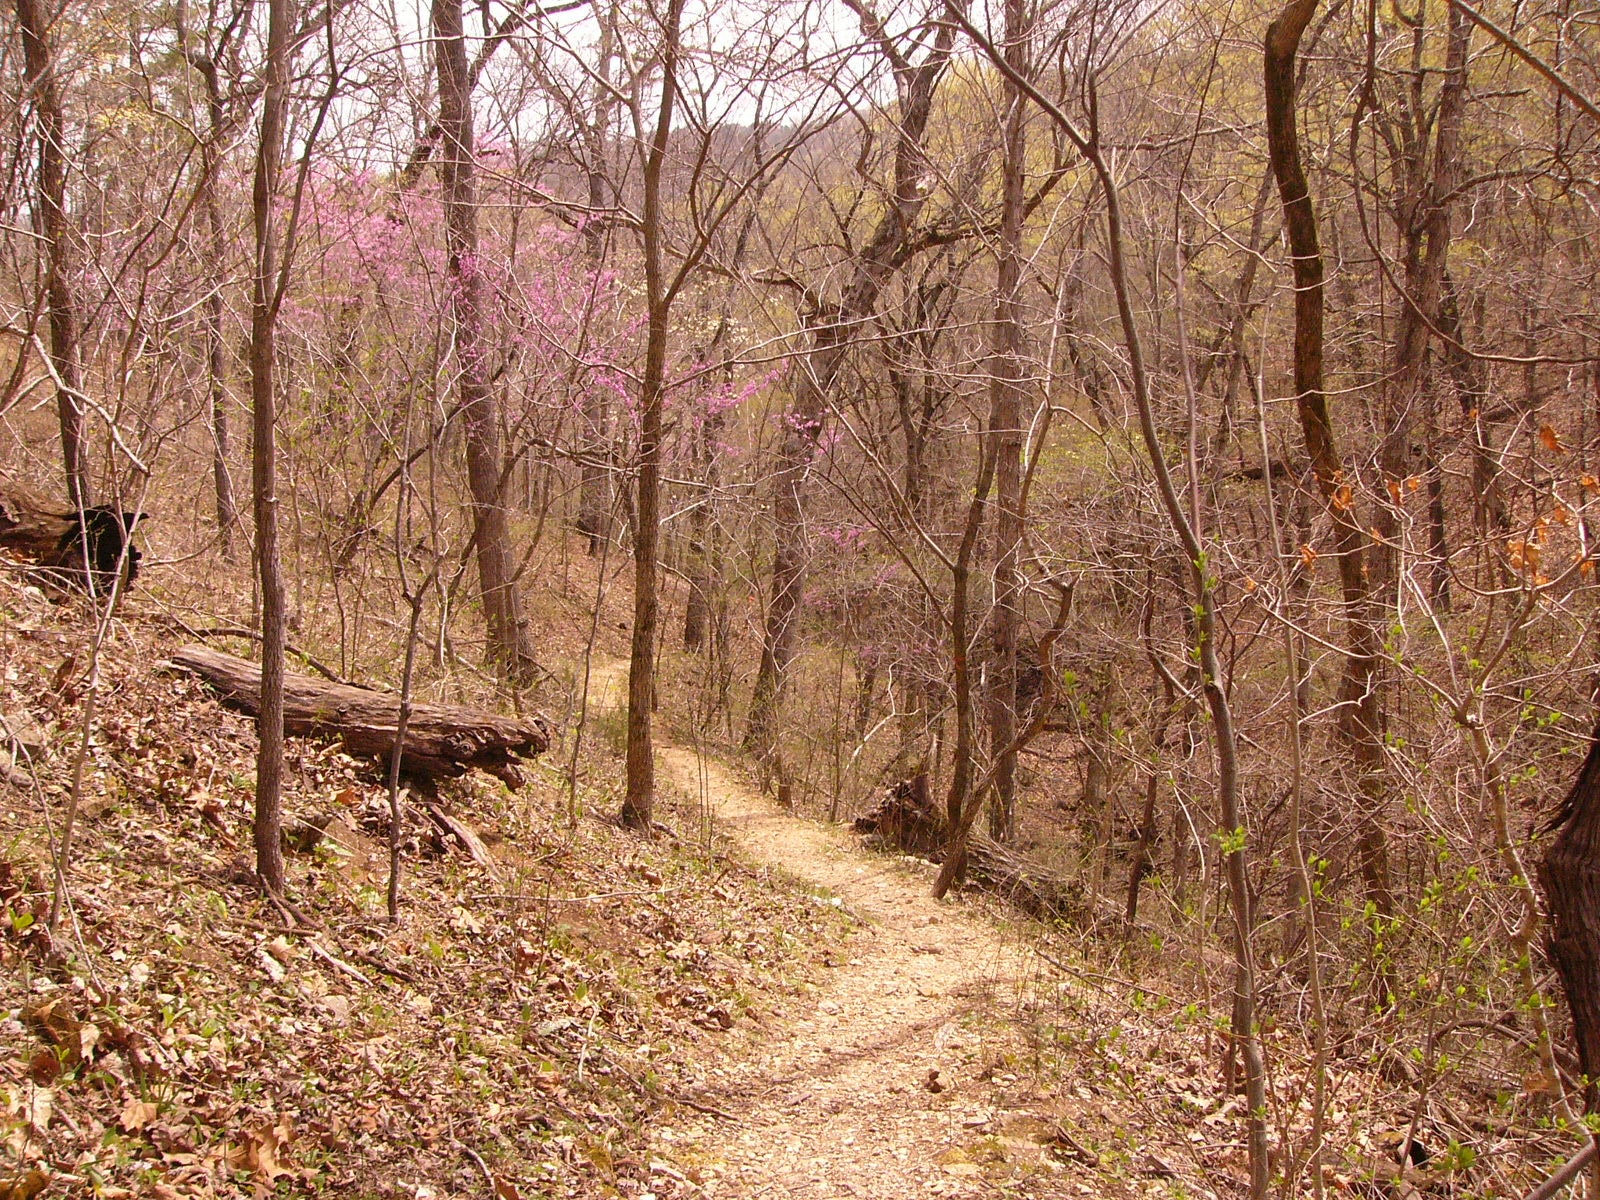 One of the trails in early spring